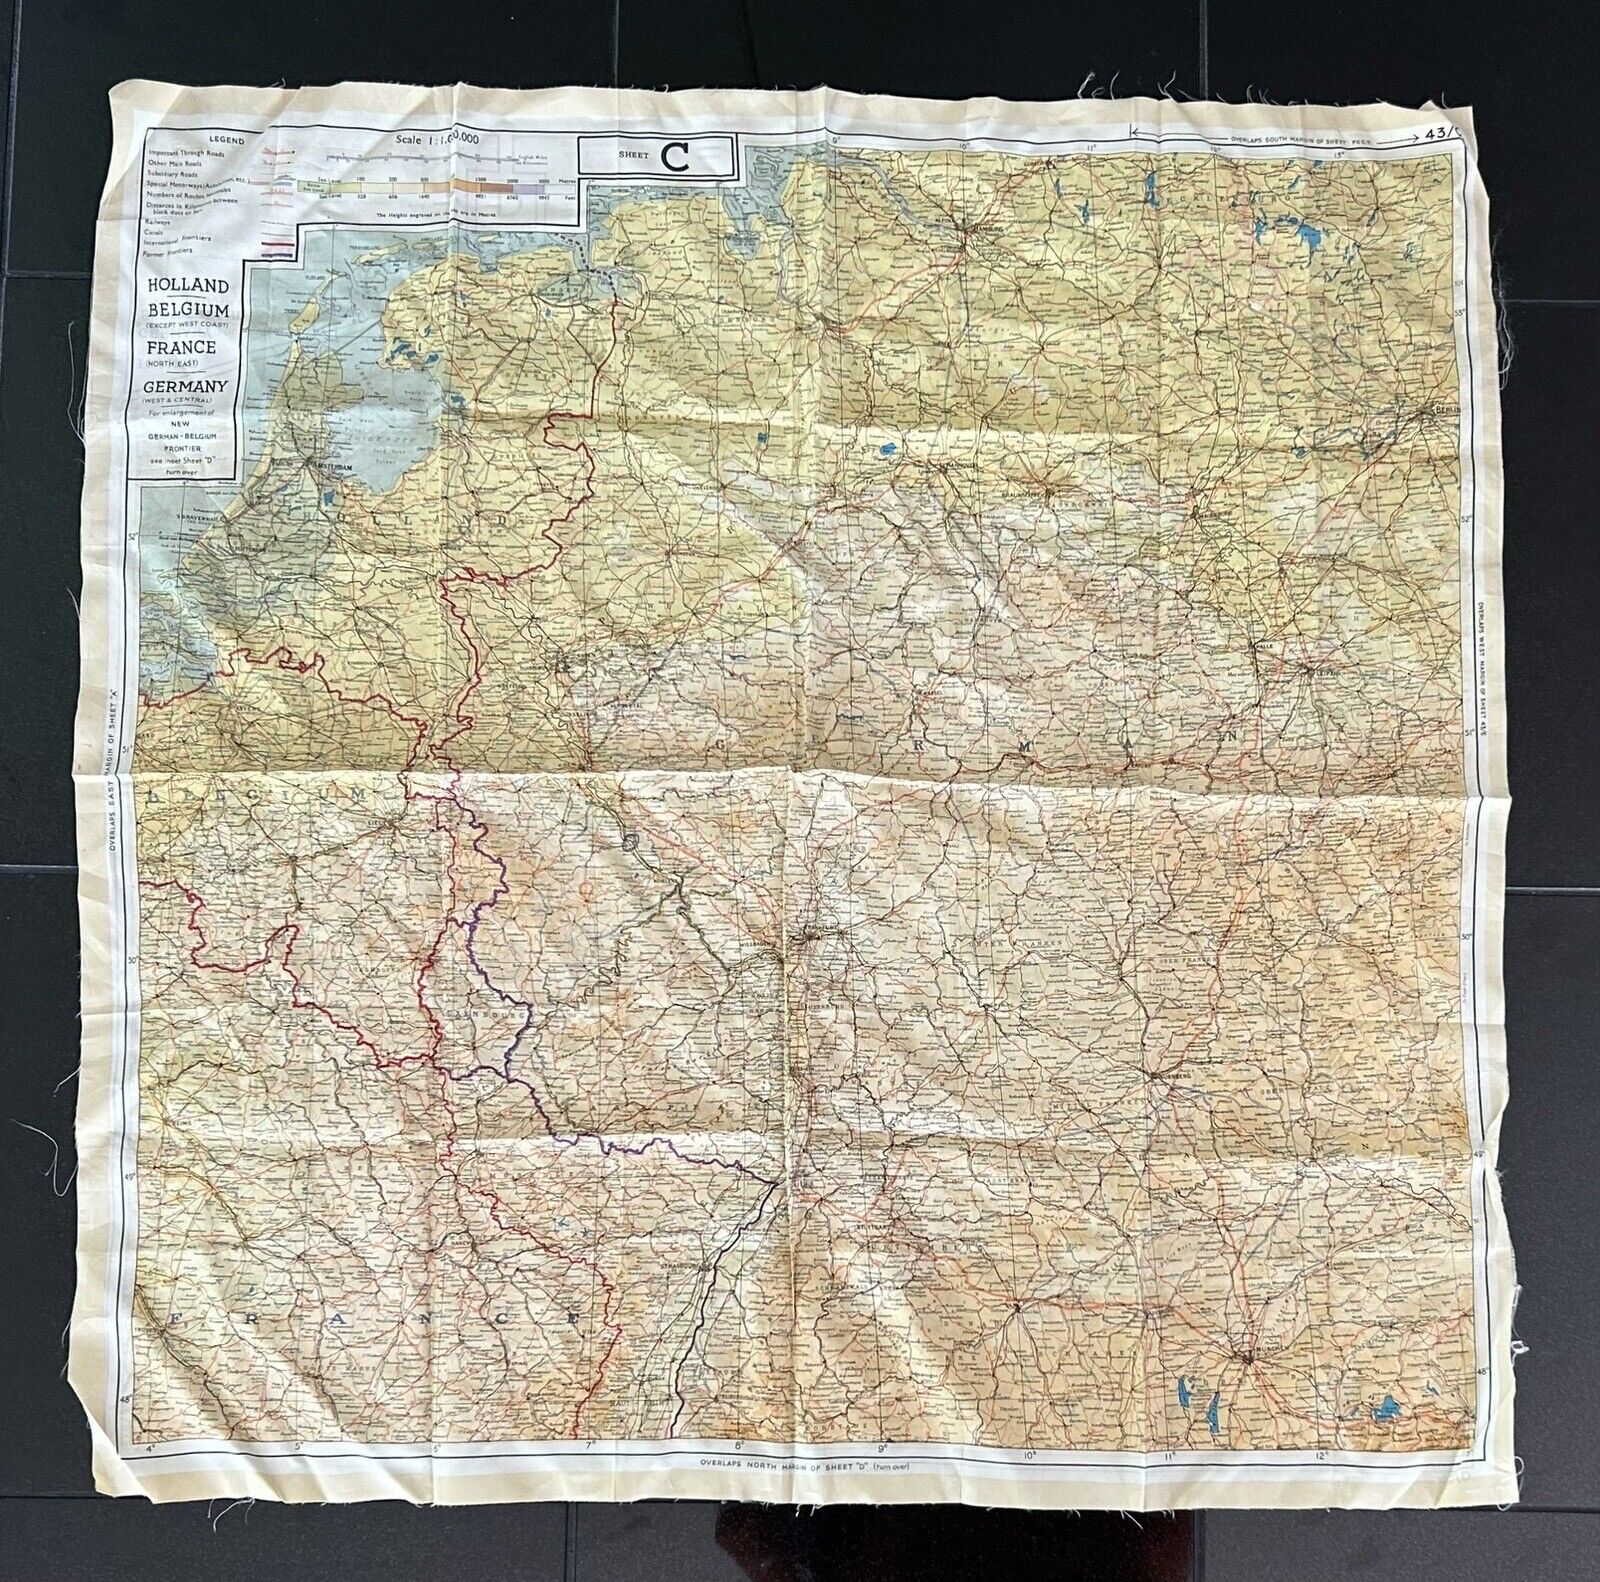 Vtg WWII Army Paratrooper Silk Escape Map C & D Holland Belgium France Germany 